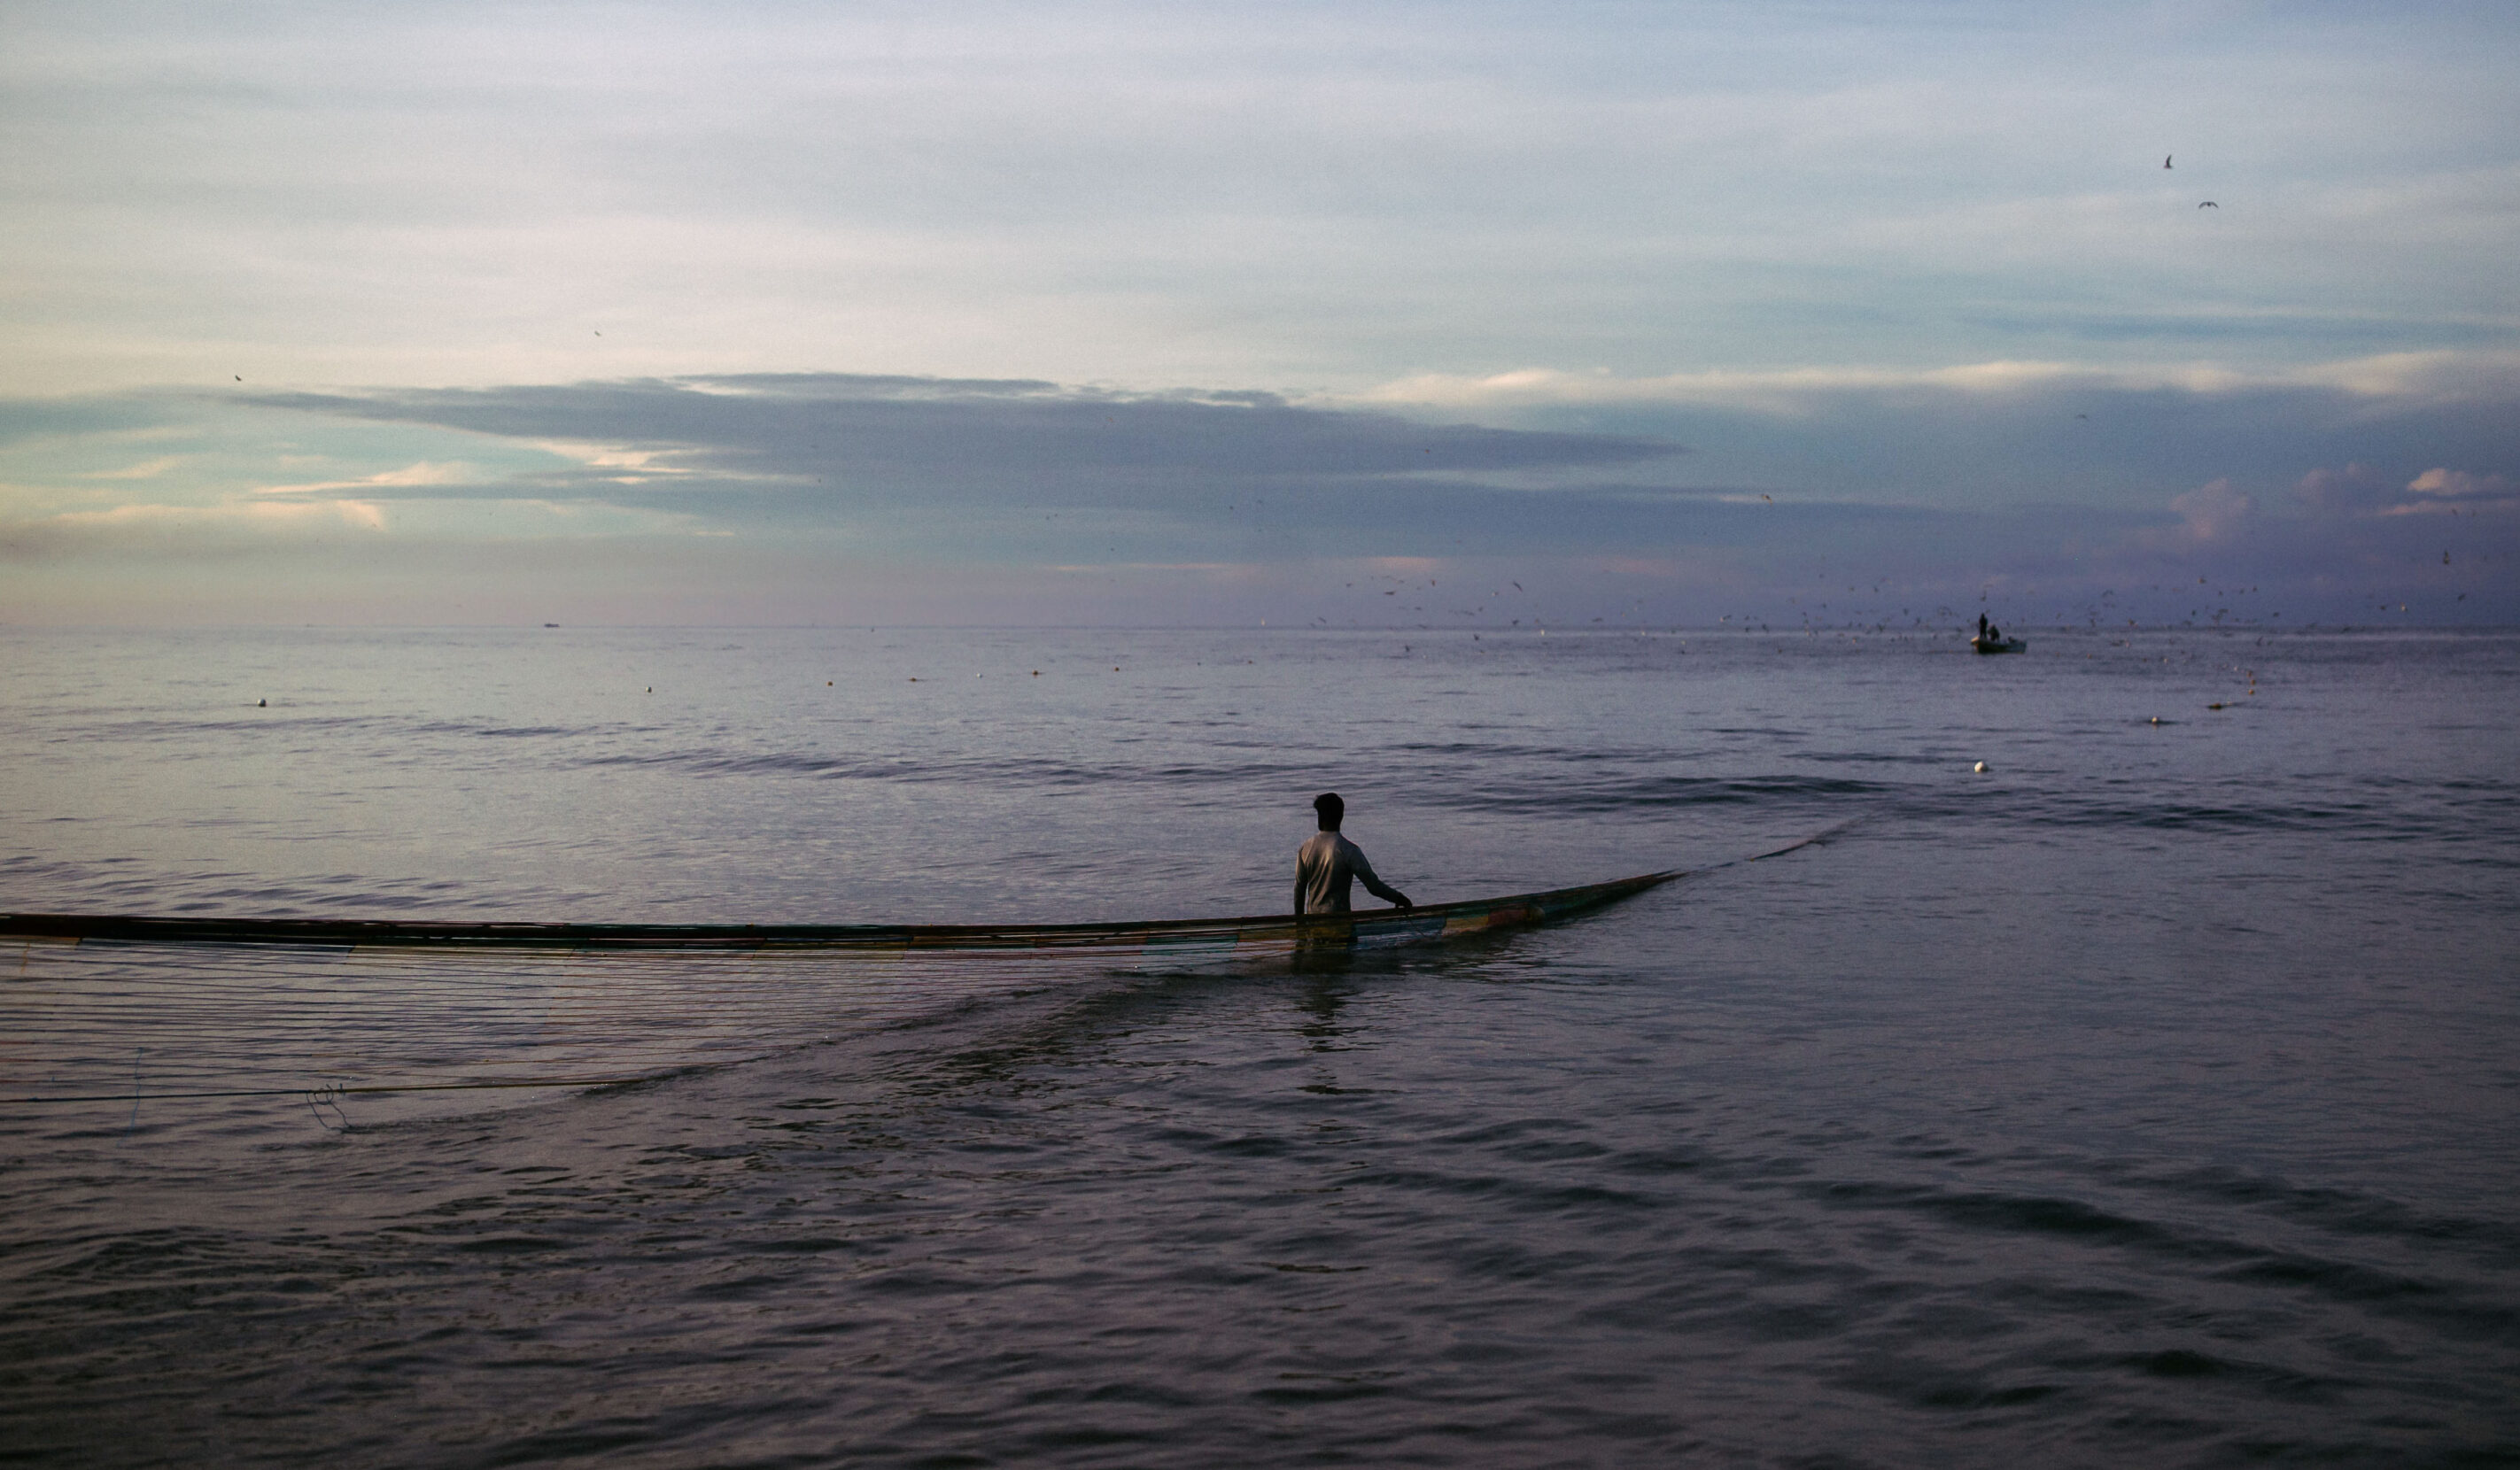 A single fisherman stands thigh-deep in calm ocean waters beside a large net.